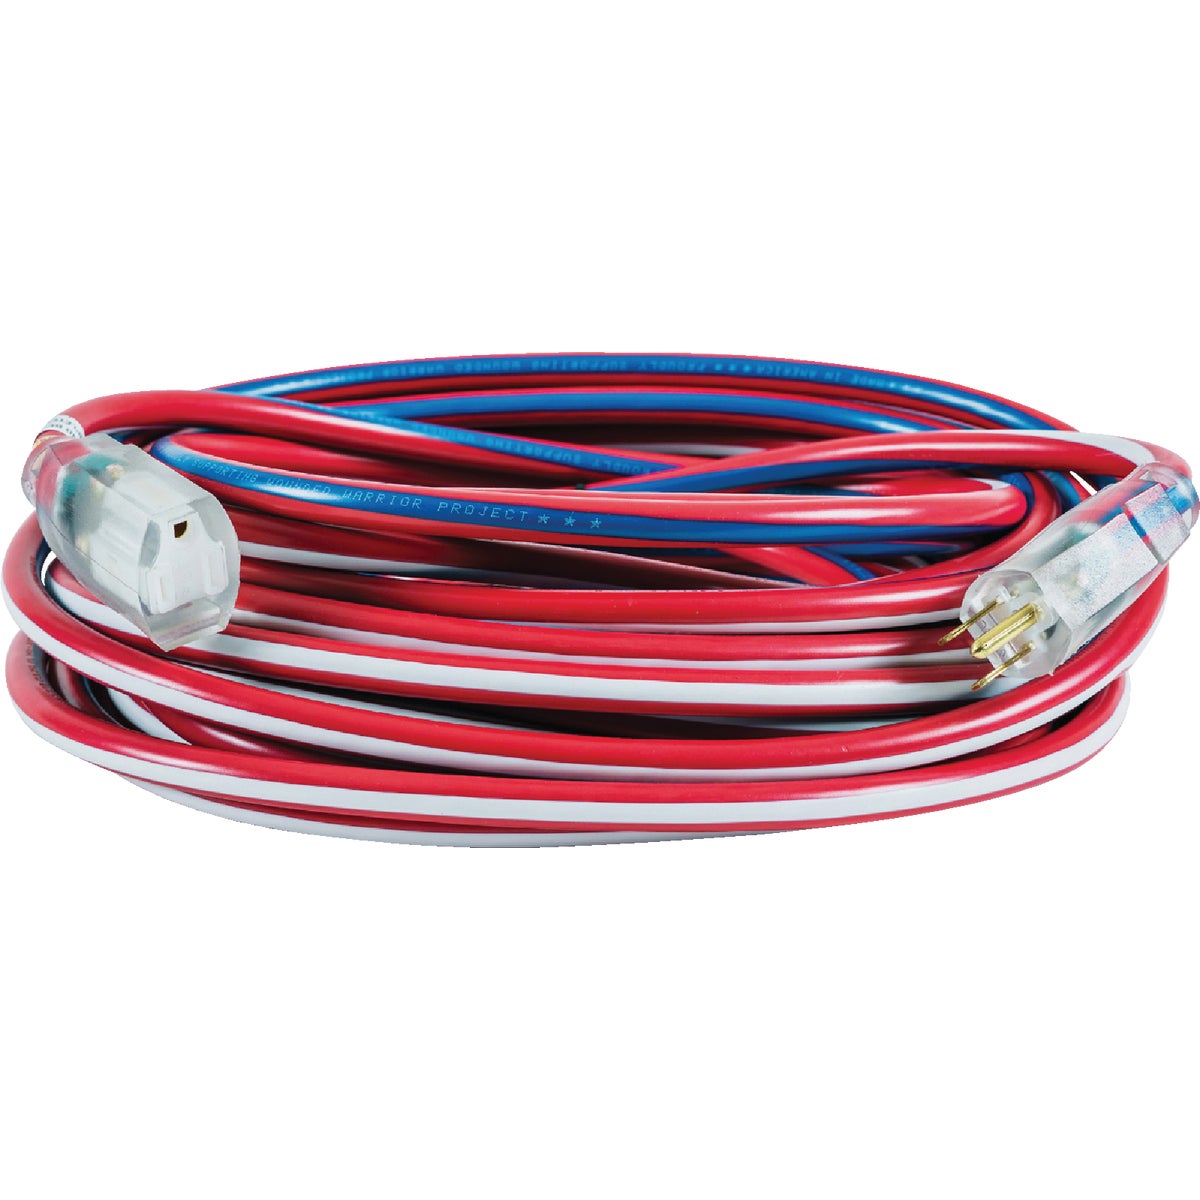 Southwire Wounded Warrior Project 50 Ft. 12/3 Indoor/Outdoor Red, White, & Blue Striped Patriotic Extension Cord